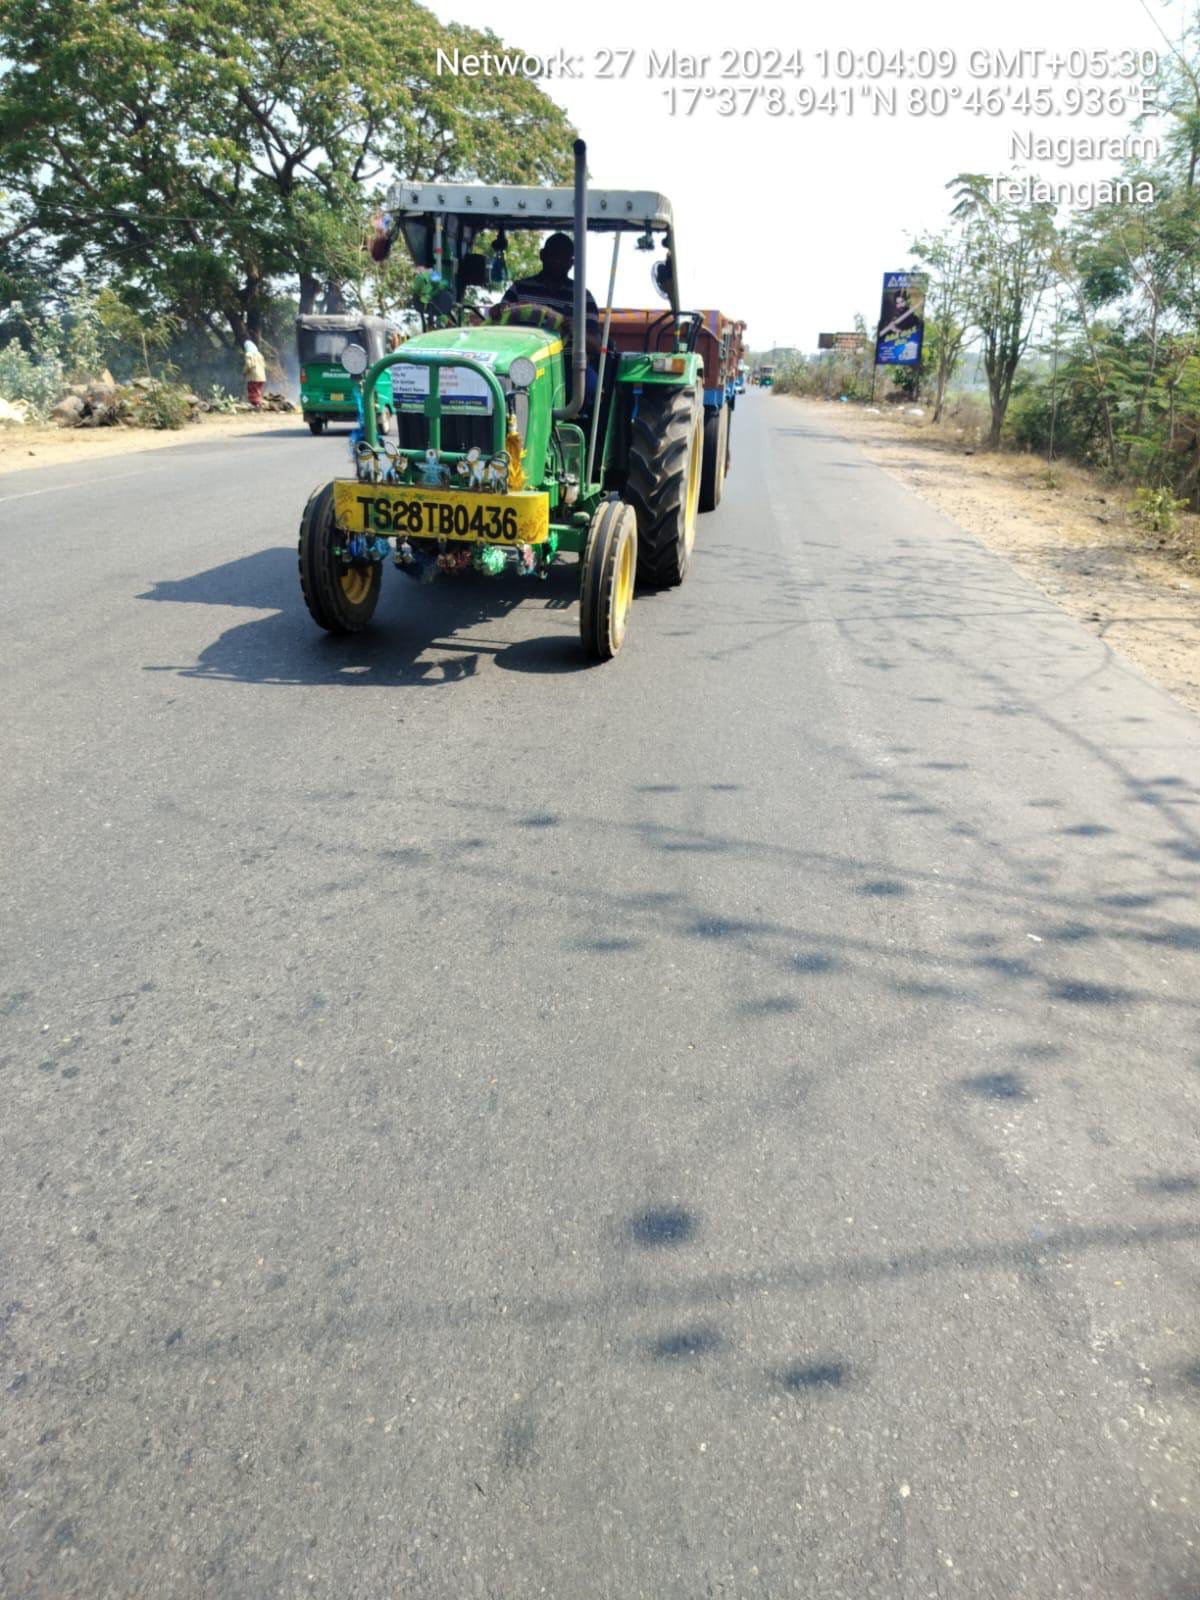 Kothagudem cop issue a challan to tractor driver for not wearing seat belt